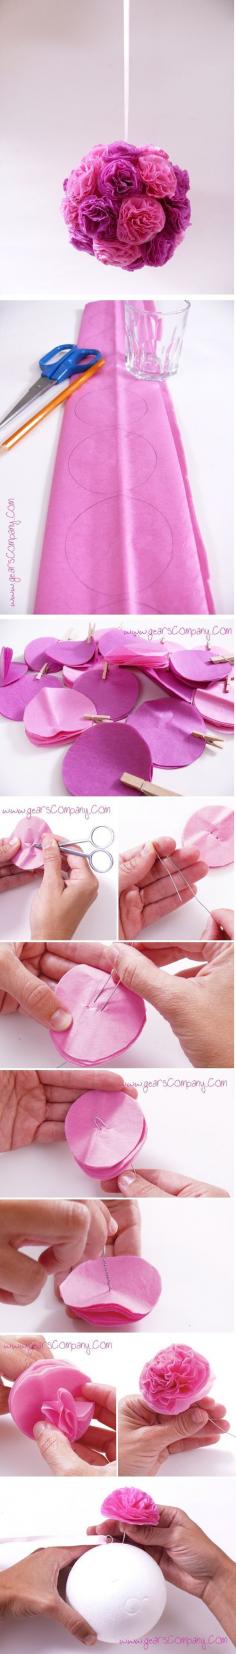 
                    
                        10 Amazing Ideas For Diy Home Decoration 10 | Diy Crafts Projects & Home Design
                    
                